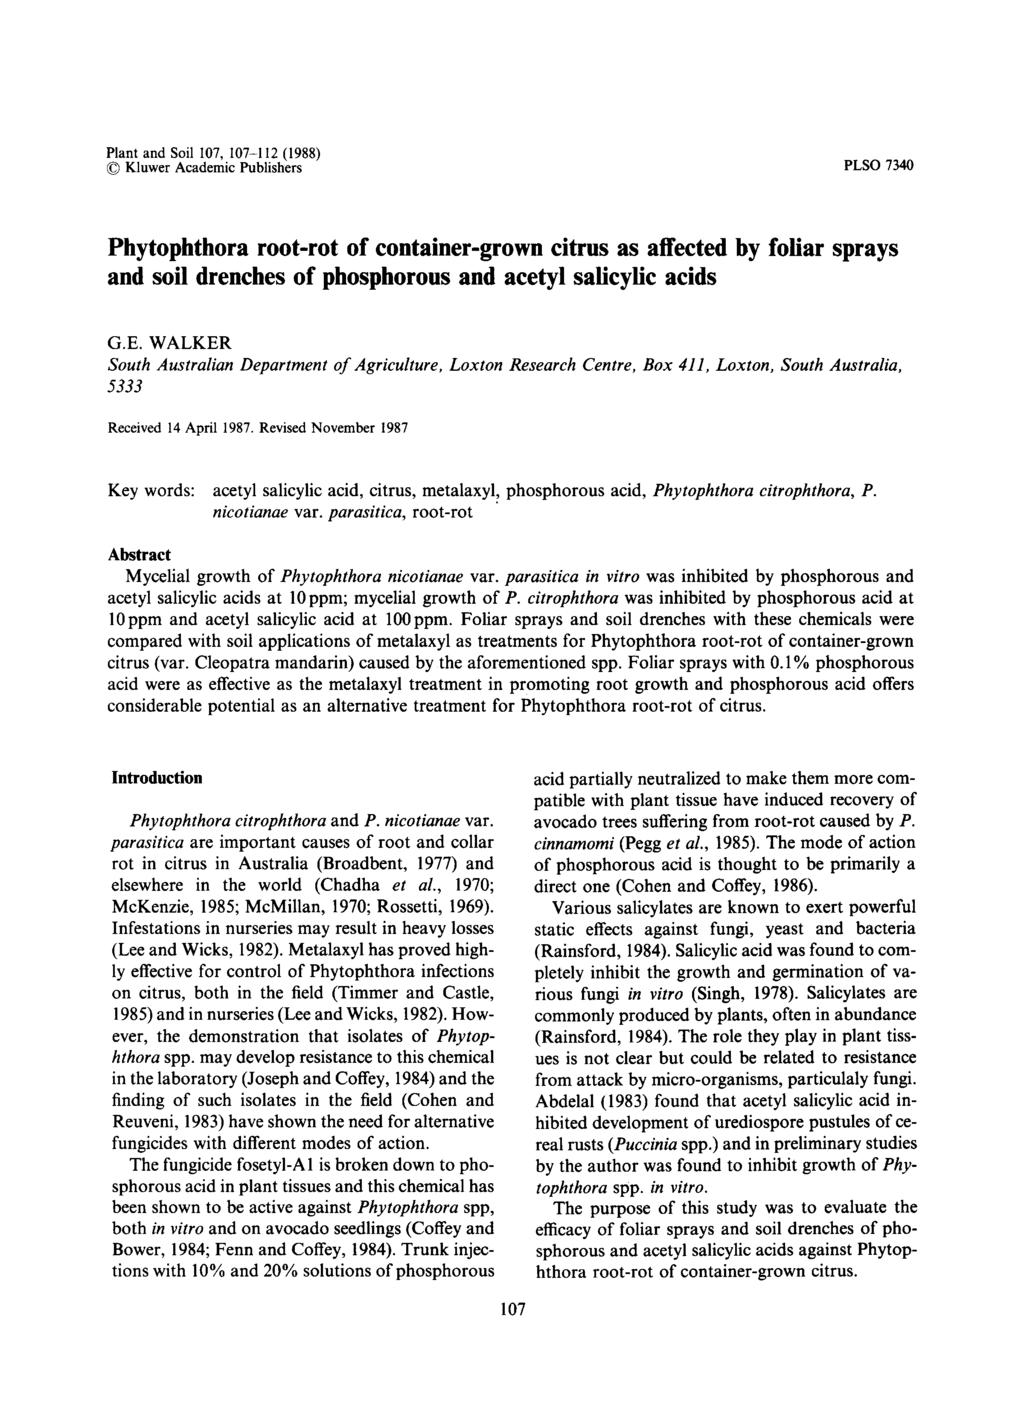 Plant and Soil 107, 107-112 (1988) 9 Kluwer Academic Publishers PLSO 7340 Phytophthora root-rot of container-grown citrus as affected by foliar sprays and soil drenches of phosphorous and acetyl